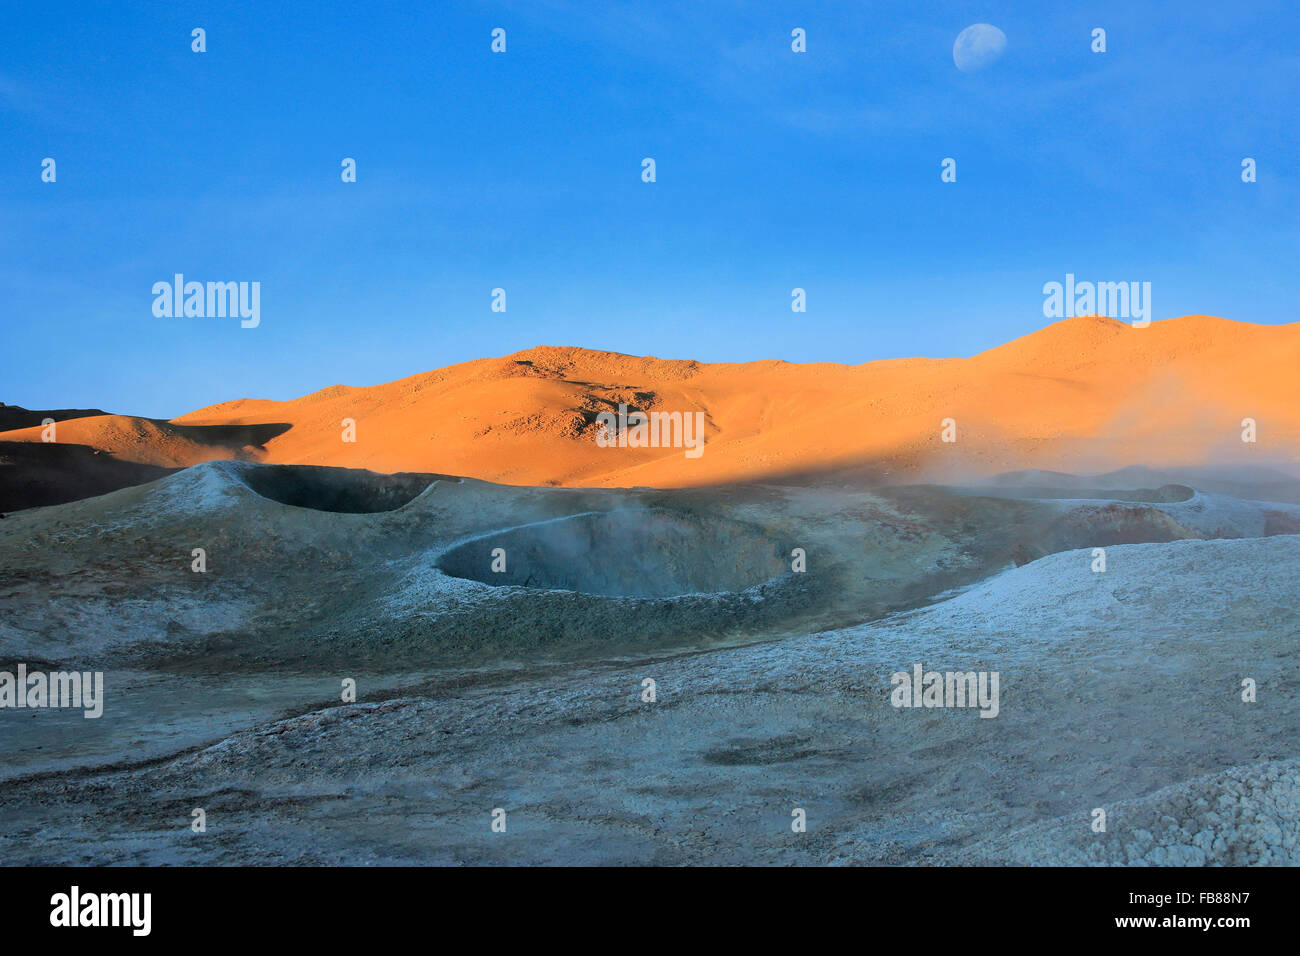 Craters volcanic landscape in the deserts of Bolivia Stock Photo